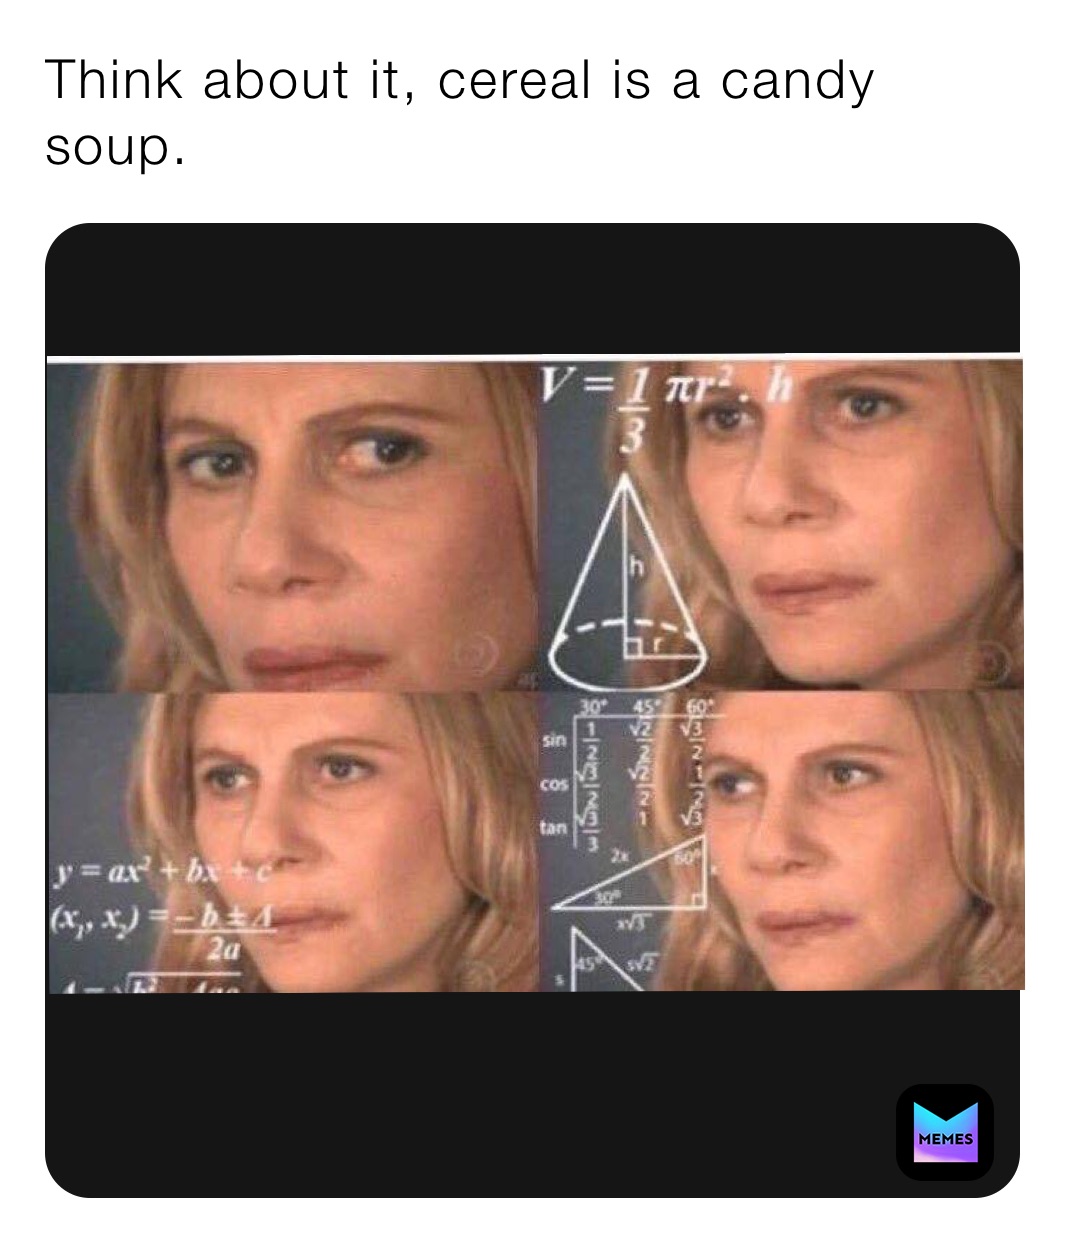 Think about it, cereal is a candy soup.